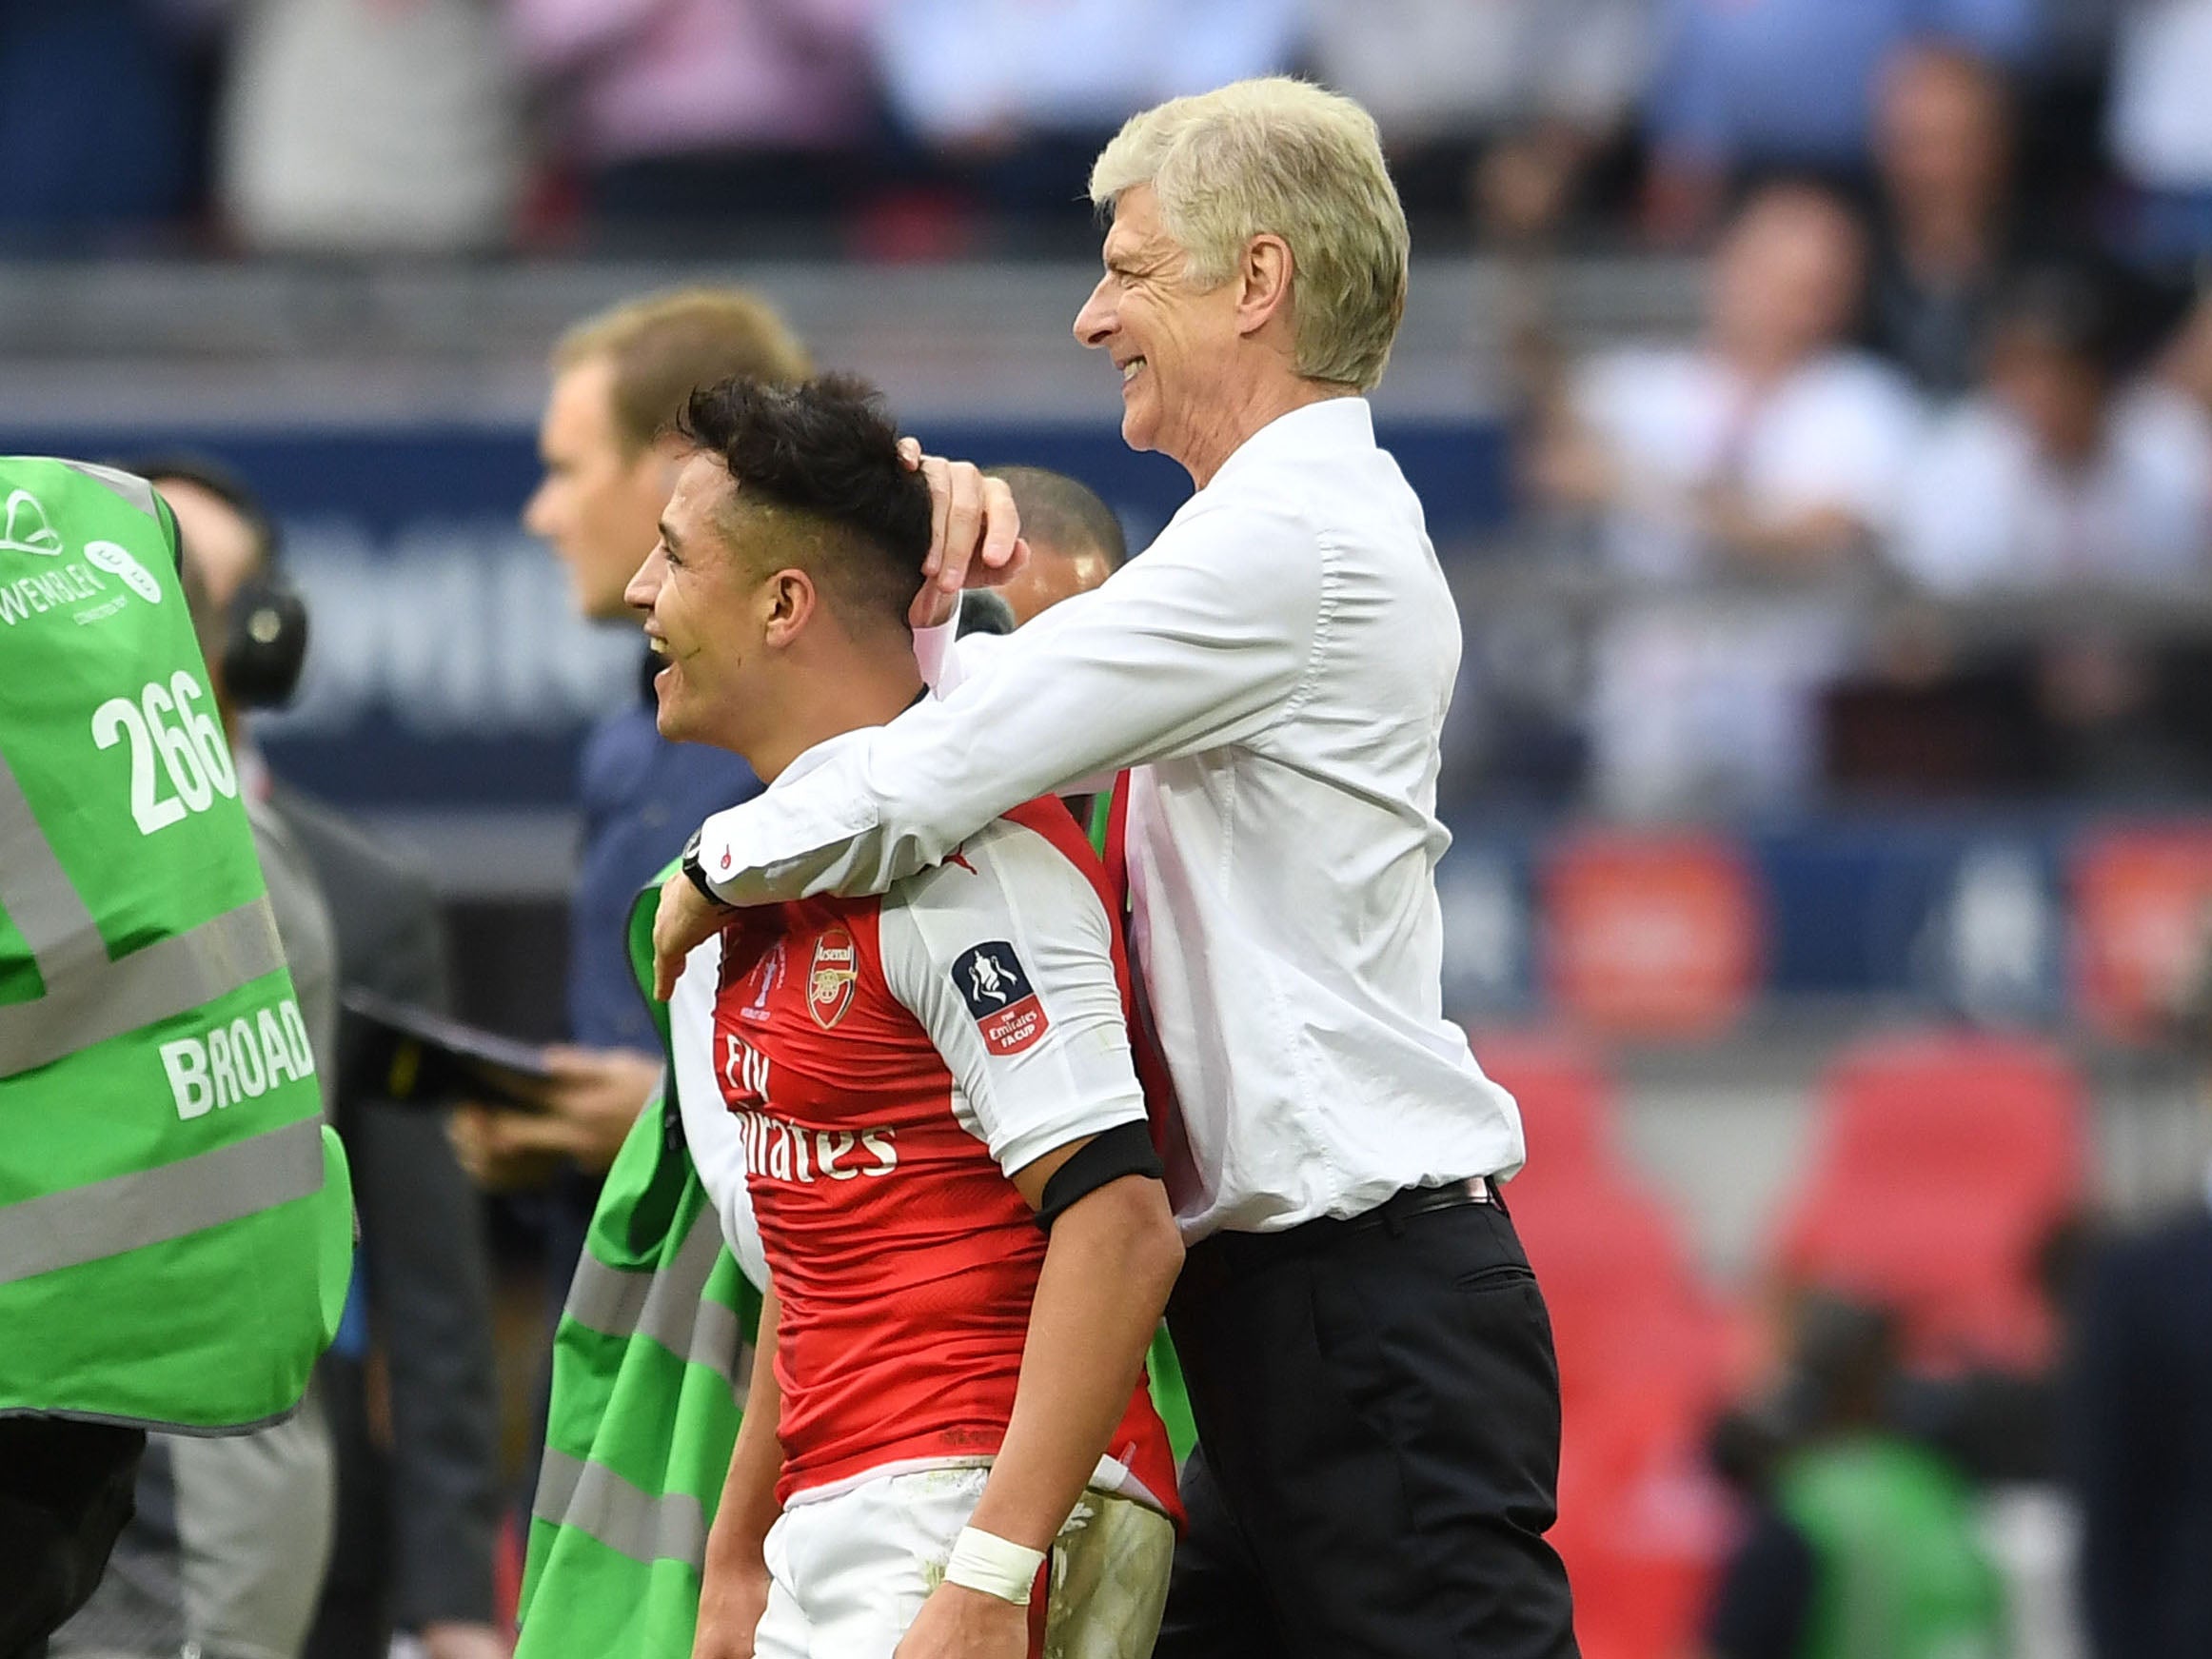 Wenger says he is confident Sanchez will remain an Arsenal player